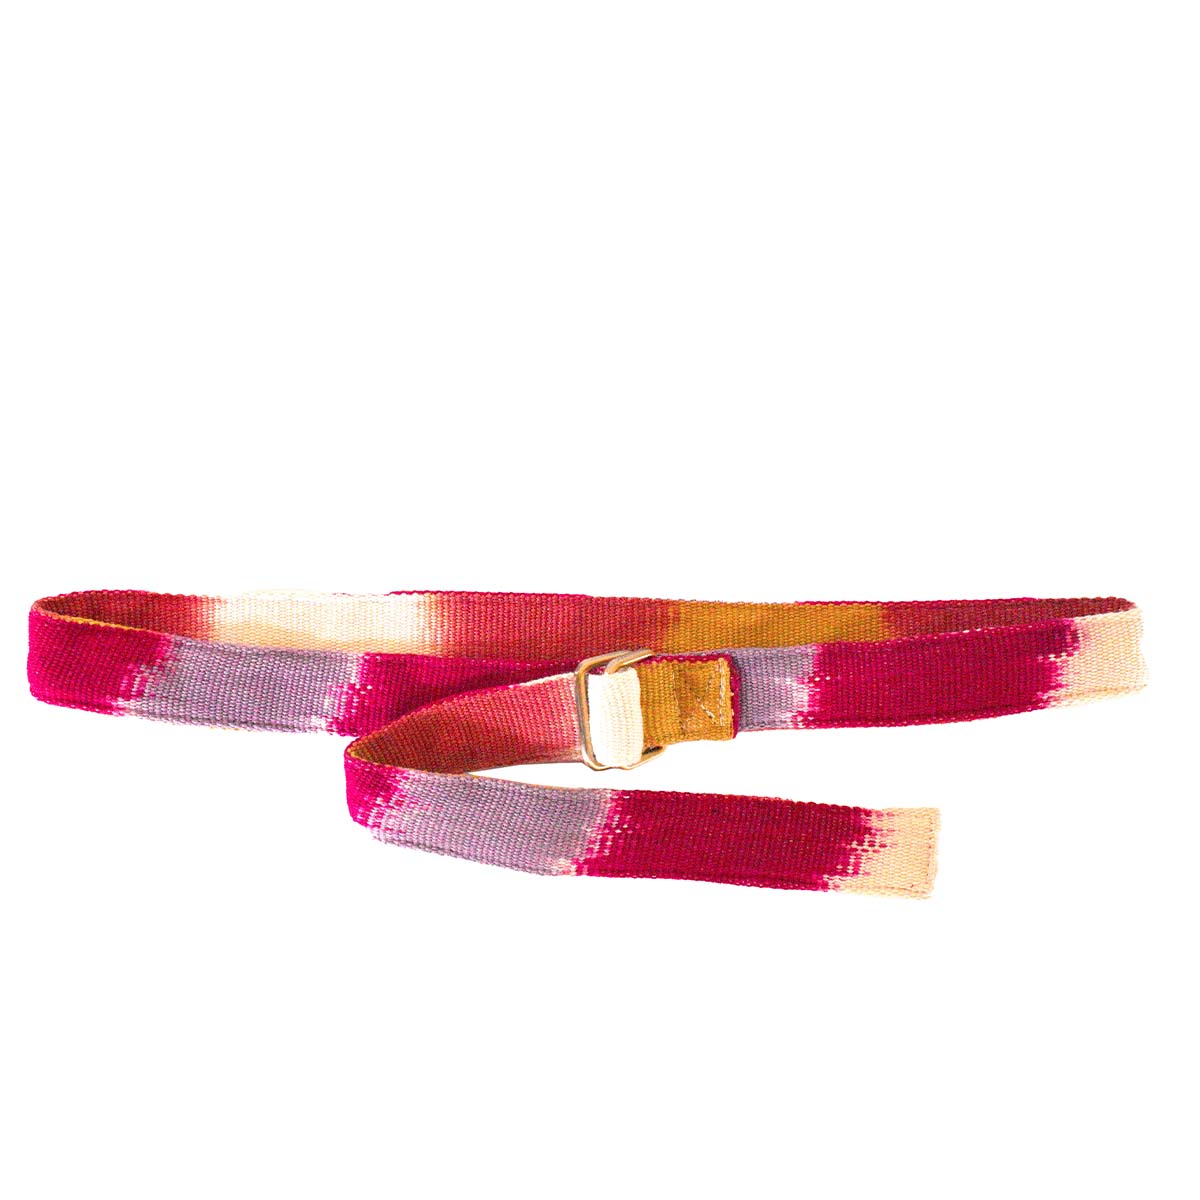 The Celeste Belt in Raspberry Paleta pattern. It has a flame stitch red, purple, yellow ochre, and white pattern.